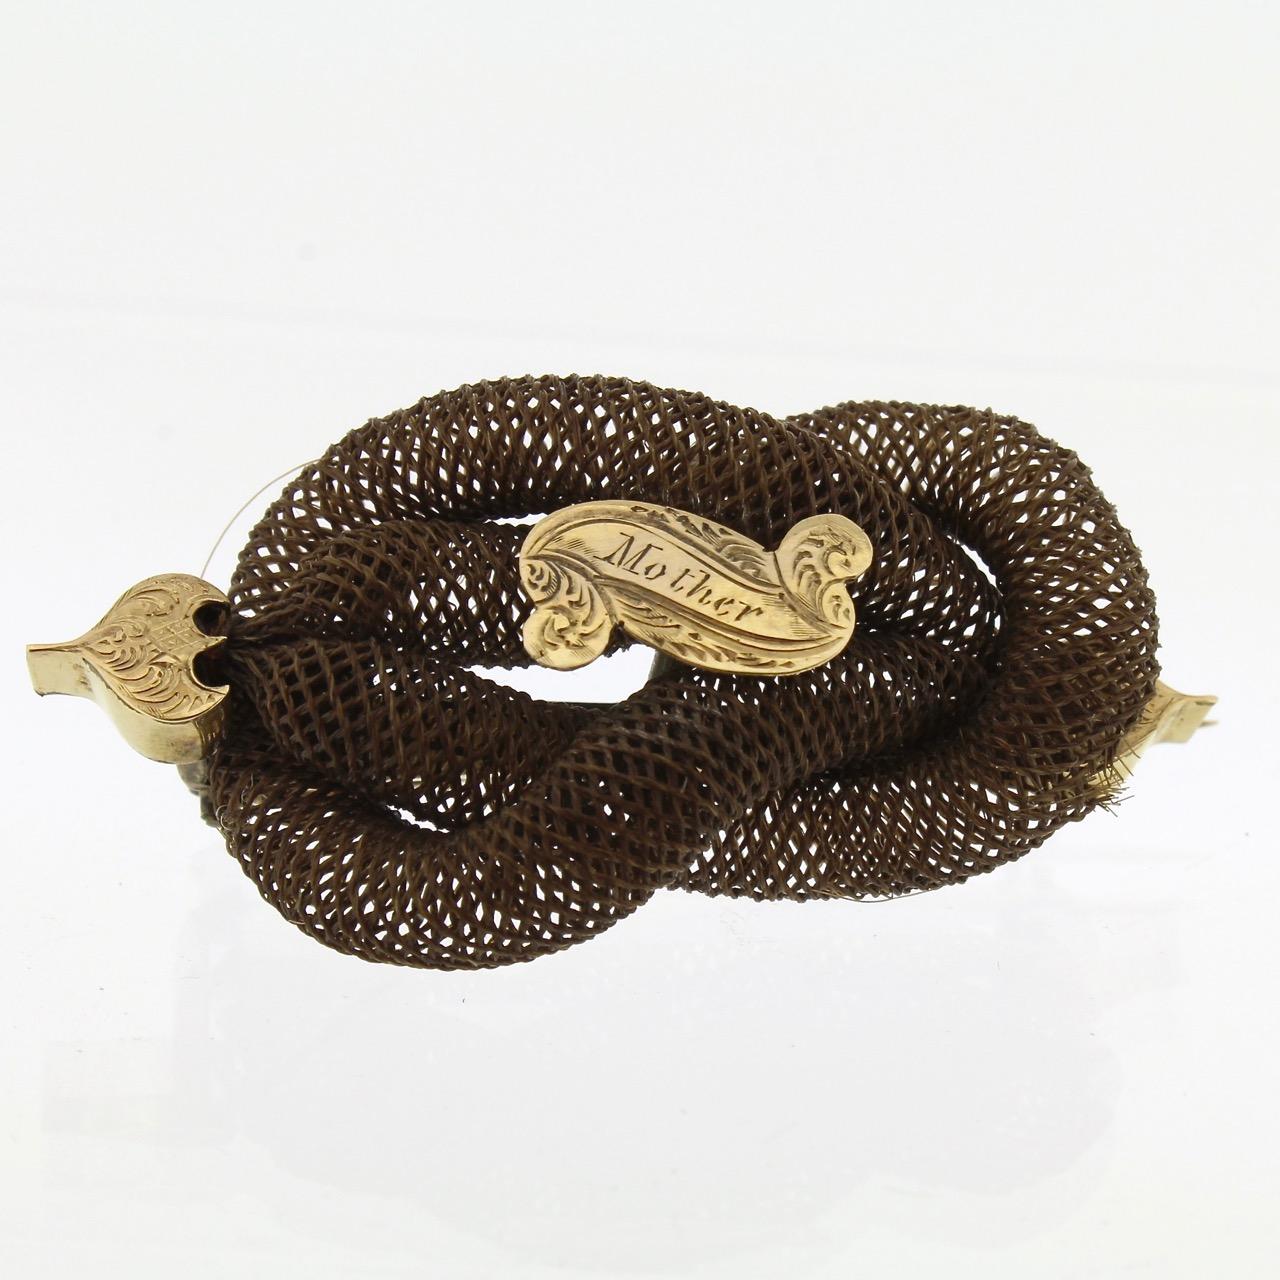 A good late Georgian or Victorian memorial hair art brooch.

Comprised of an interlocking double looped knot of woven hair mounted with a central scroll-shaped cartouche engraved with the dedication that reads 